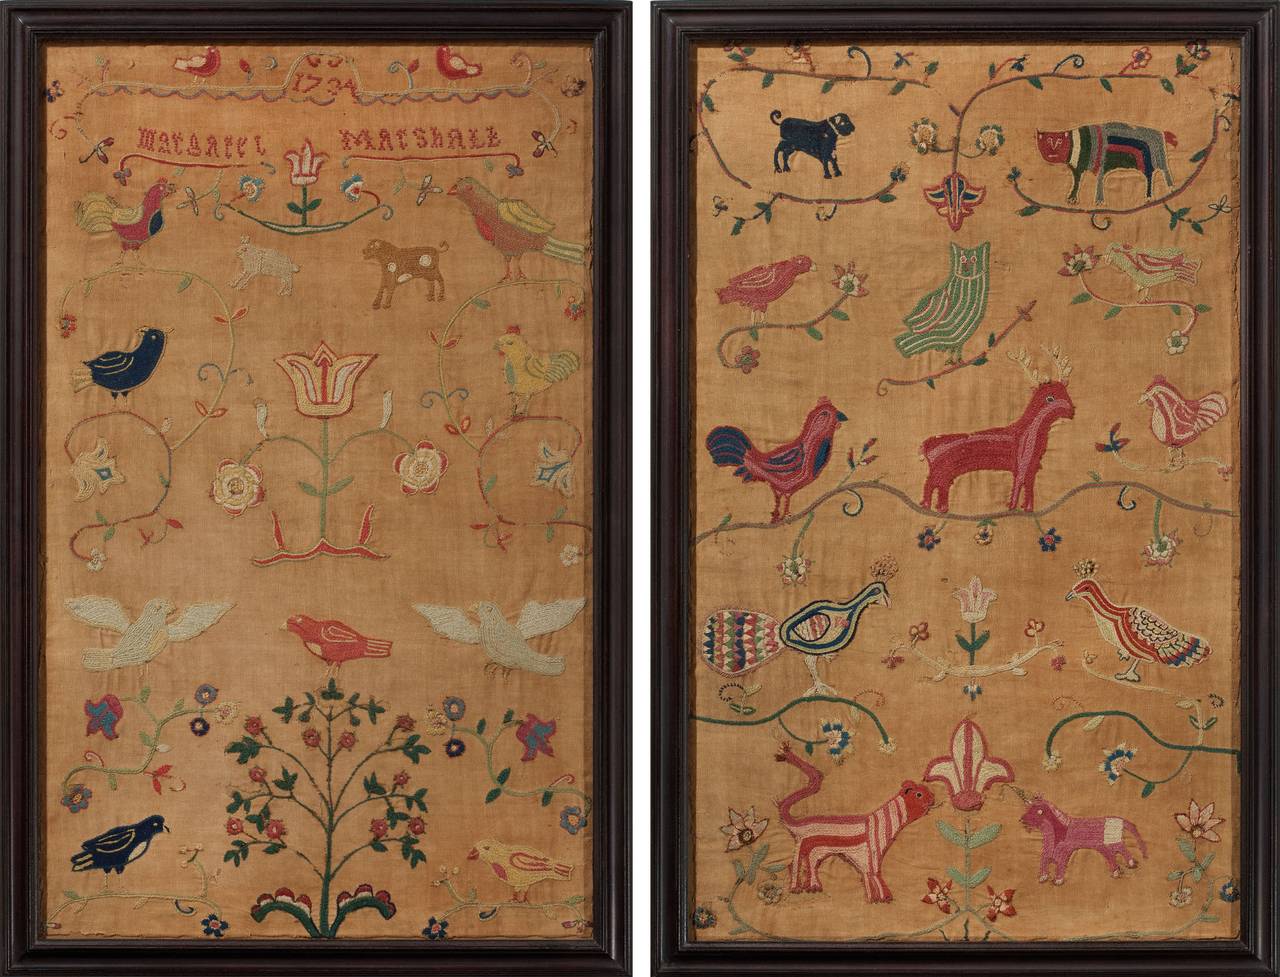 These two outstanding needlework panels are the front and back of a large, drawstring work bag made by Margaret Marshall in 1734. The front and back were separated many years ago and they were framed at that time; proper conservation mounting was